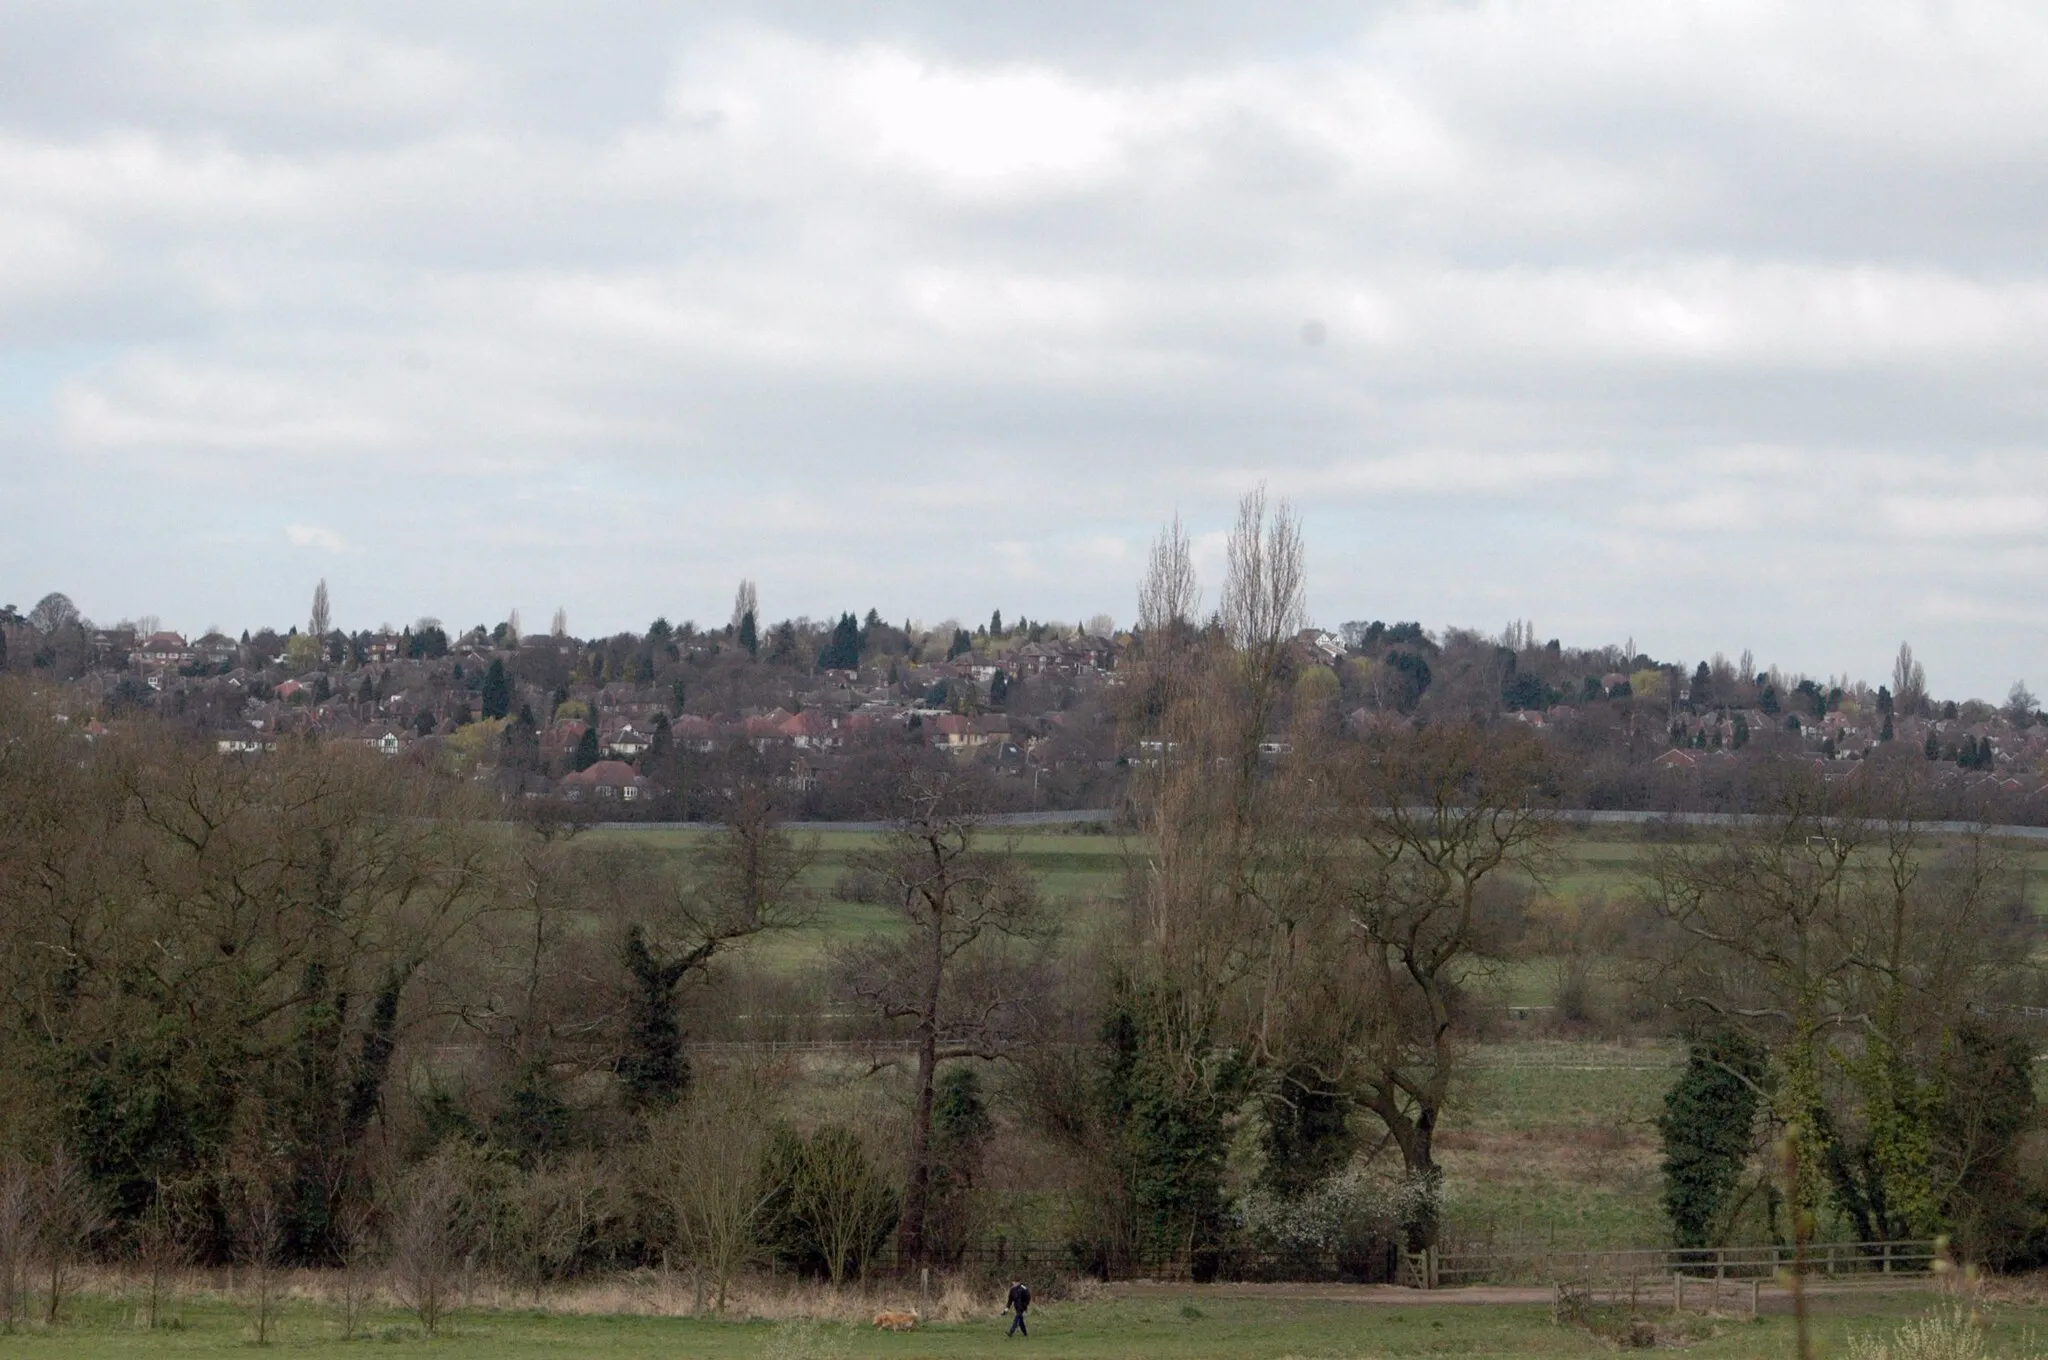 Photo showing: This is the area of Maney in the distance as viewed from the other side of New Hall Valley in Sutton Coldfield, Birmingham, England